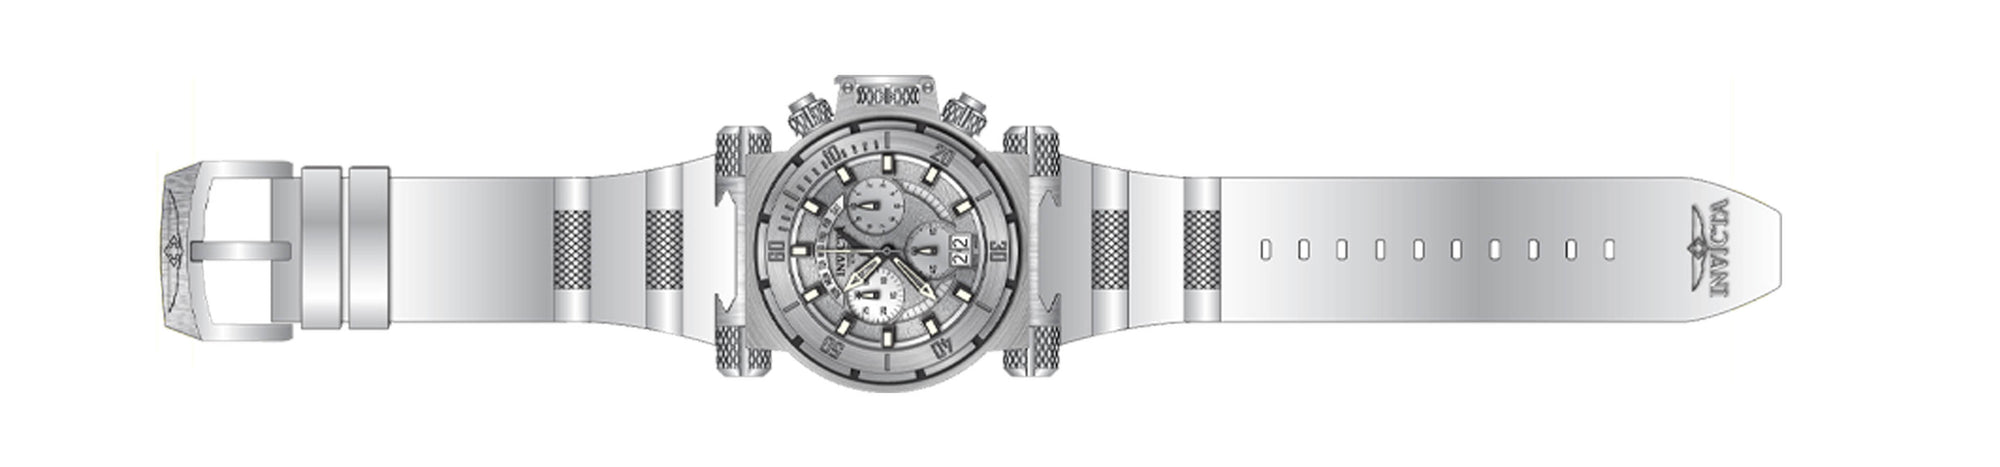 Bands for Invicta Coalition Forces 11537